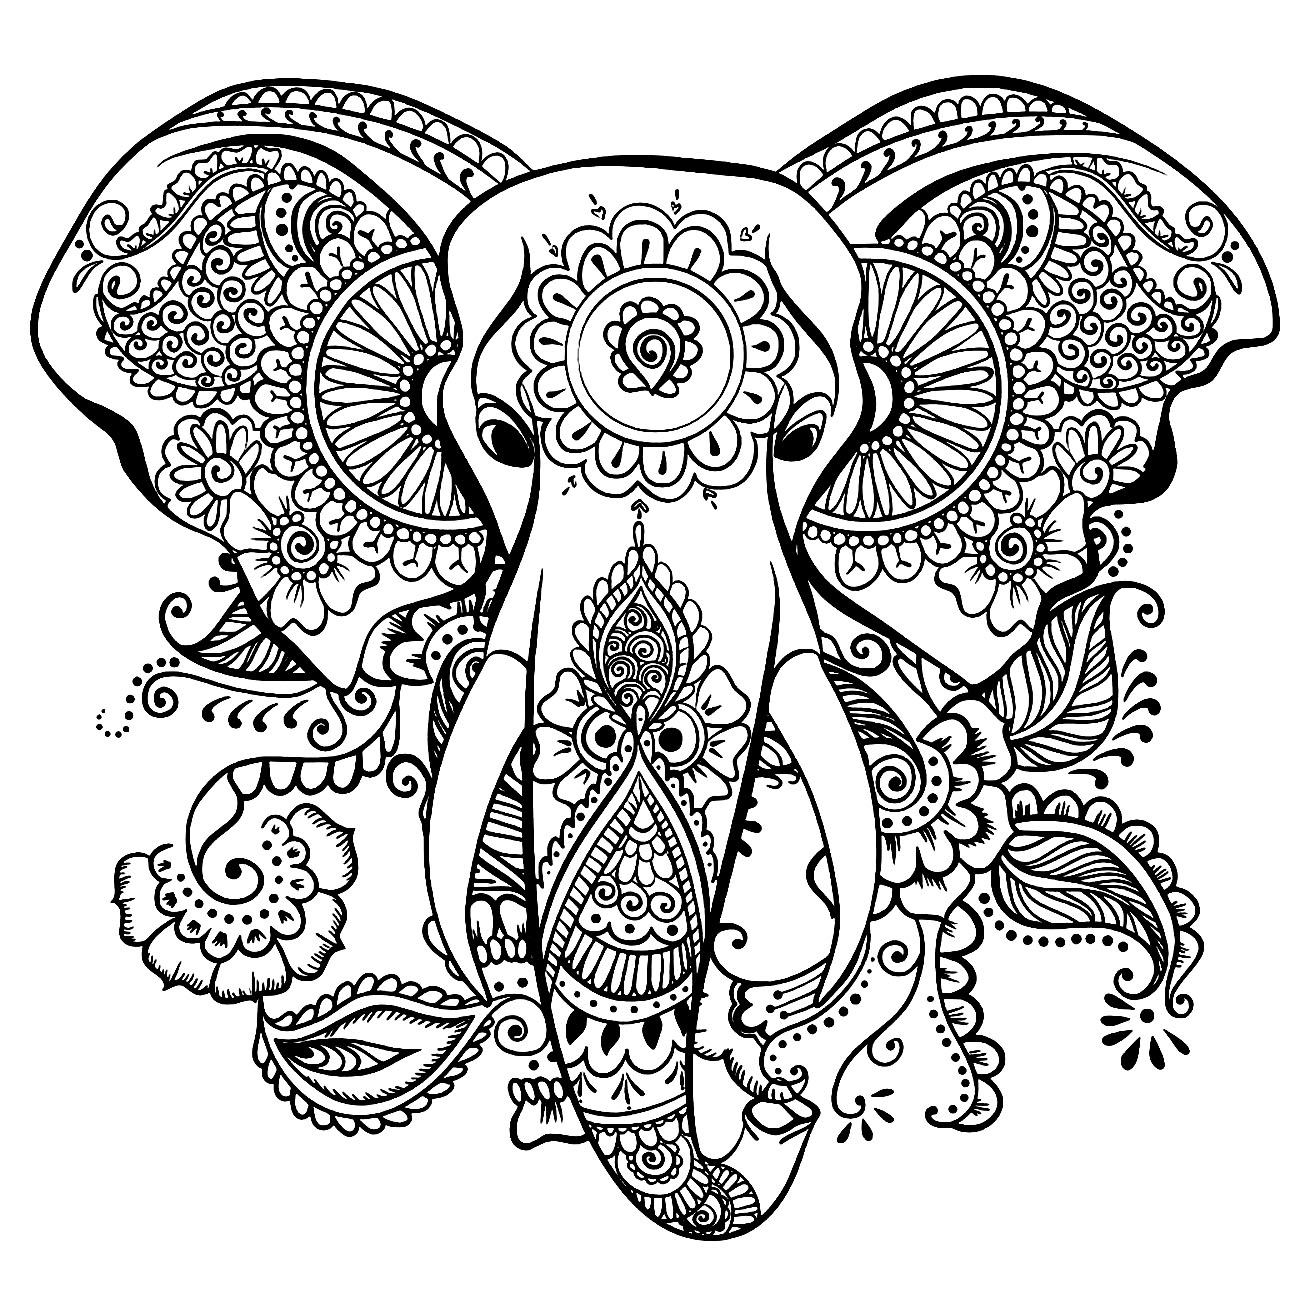 Download Elephants free to color for children - Elephants Kids Coloring Pages